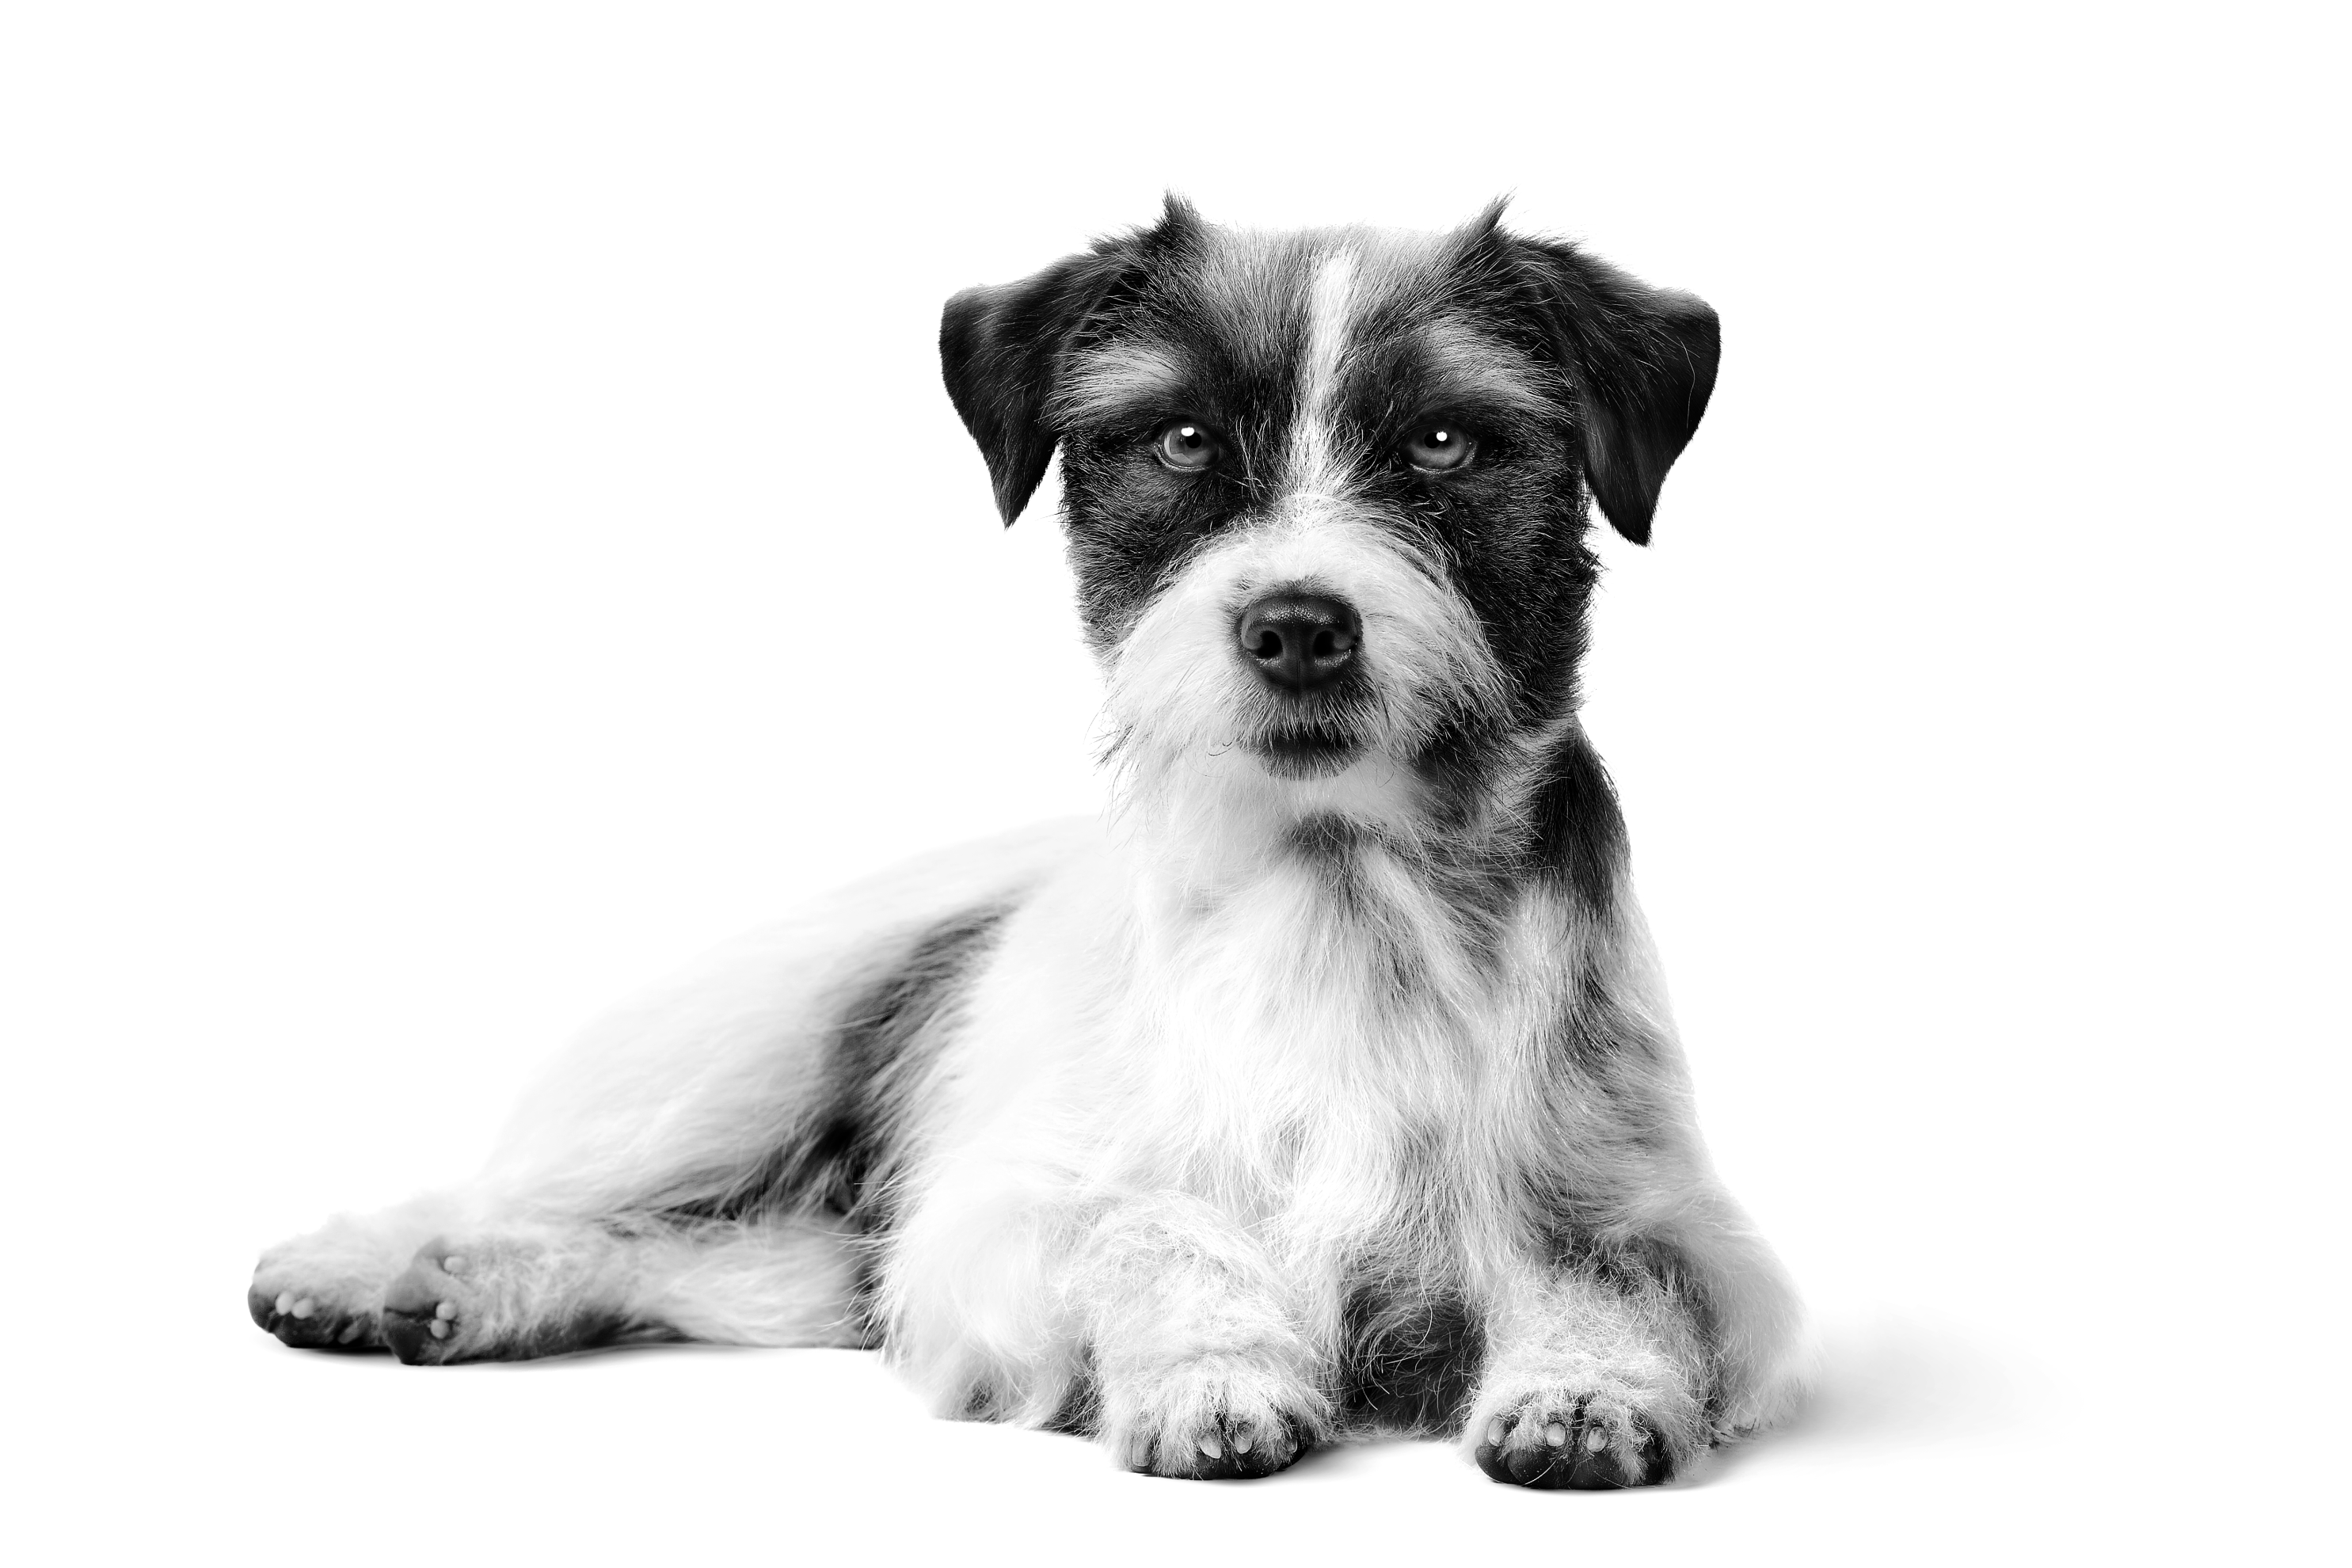 Black and white image of jack Russel dog laying down